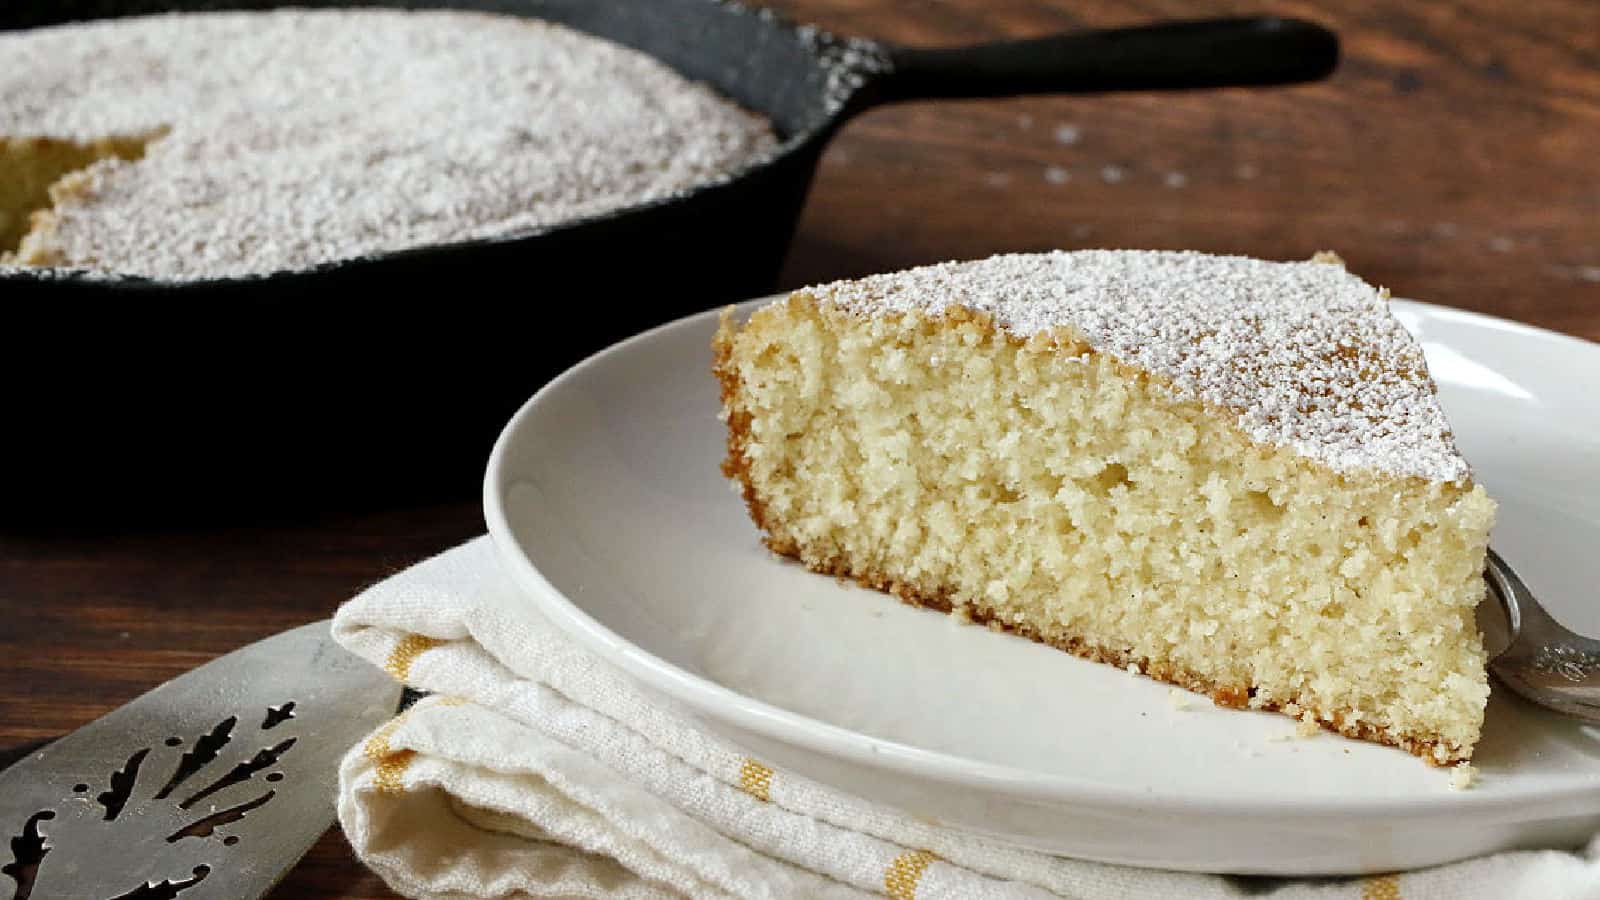 A slice of cake with powdered sugar on a plate.